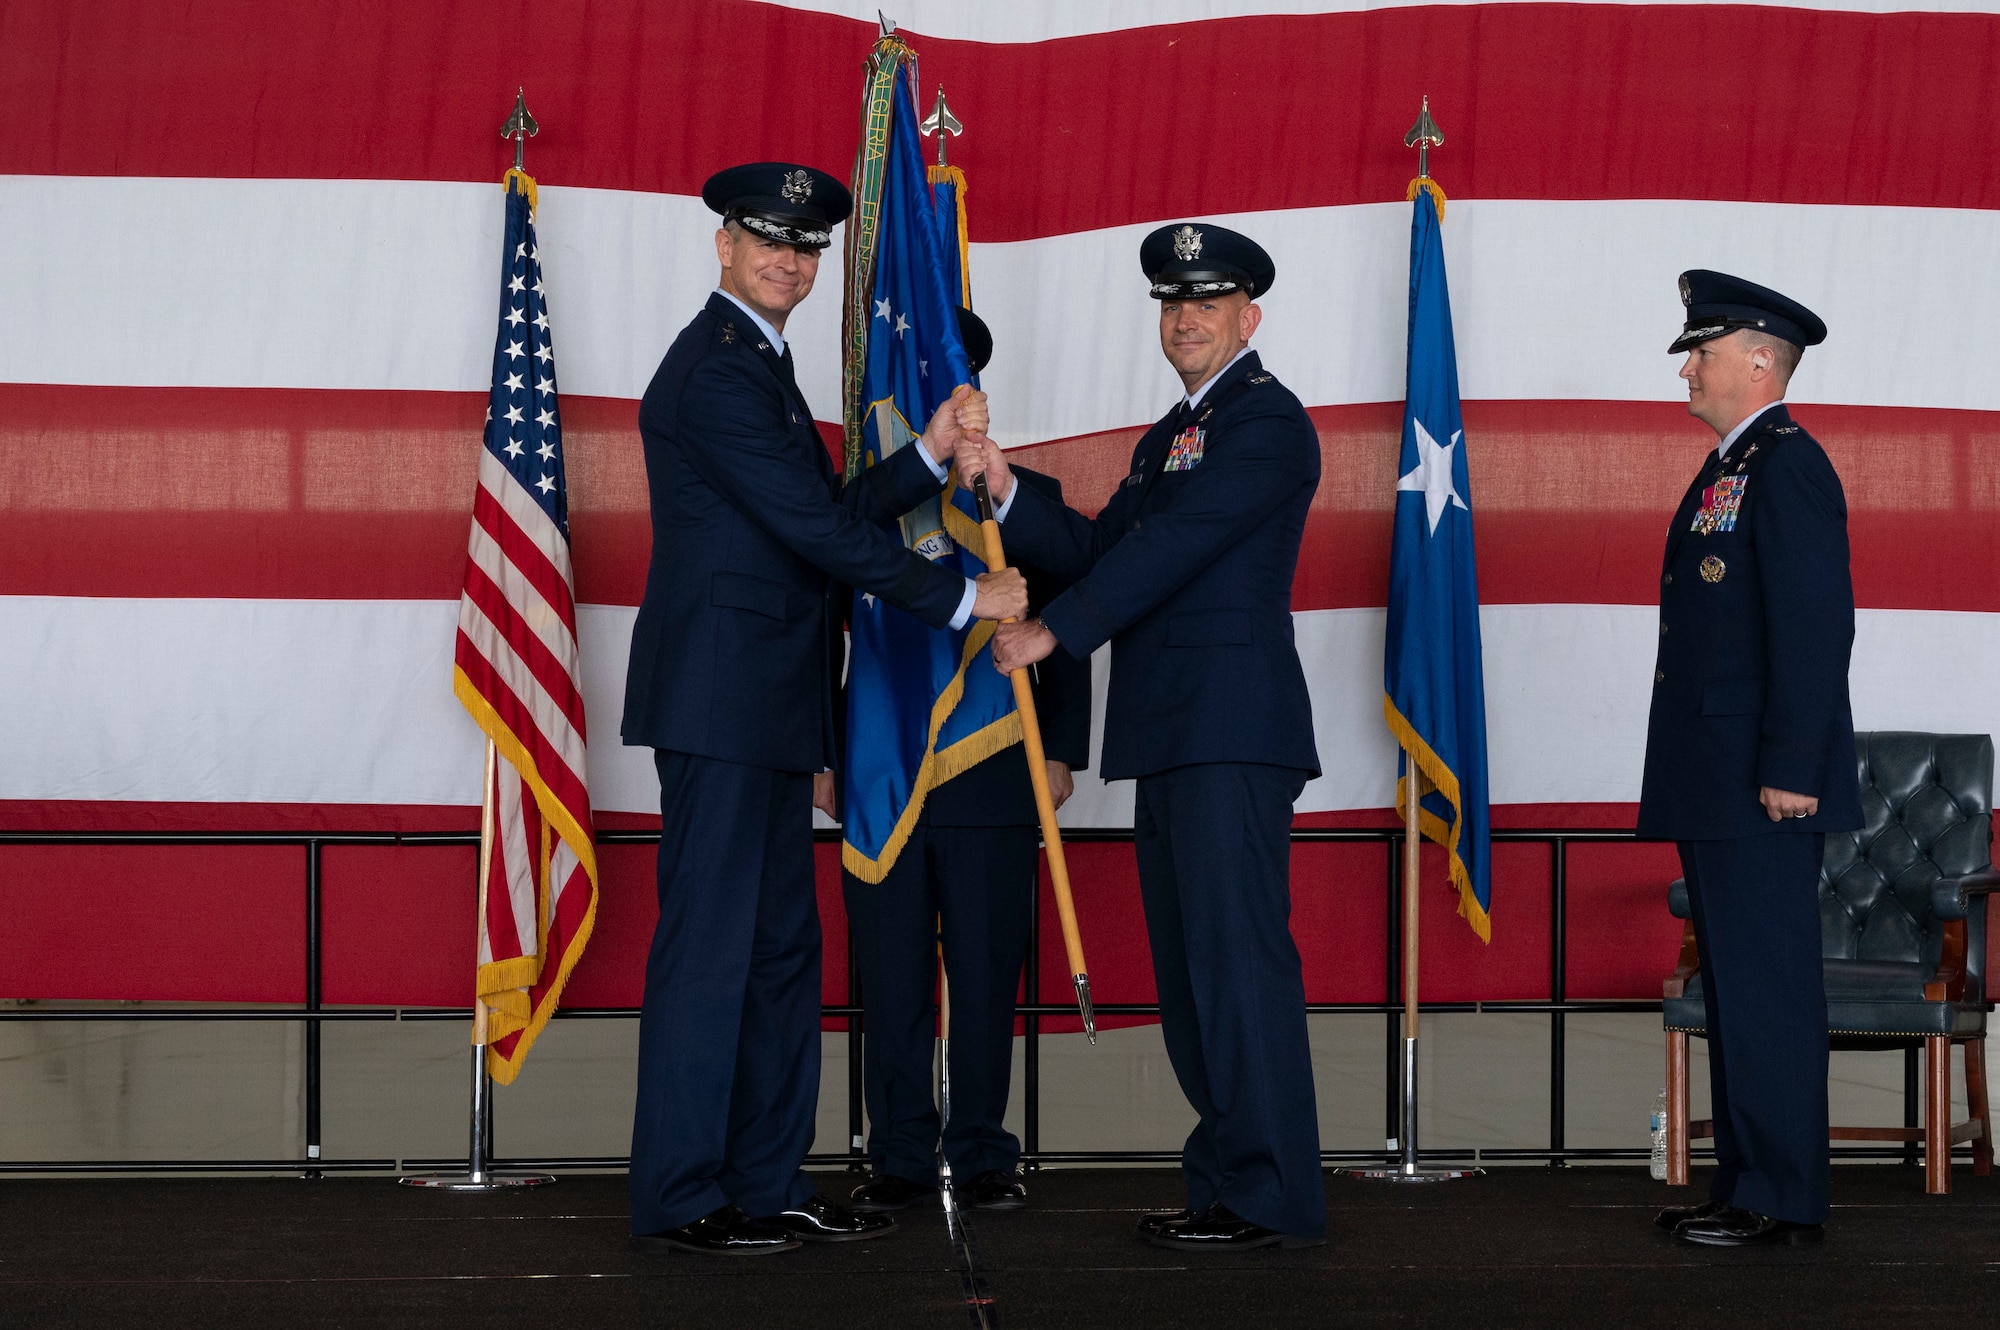 U.S. Air Force Col. Kevin Davidson accepts the 47th Flying Training Wing guidon from Maj. Gen. Craig Wills during the 47th Flying Training Wing change of command ceremony at Laughlin Air Force Base, Texas, July 22, 2022. The passing of the guidon to Davidson signifies the acceptance of command of the 47th Flying Training Wing. (U.S. Air Force photo by Airman 1st Class Kailee Reynolds)